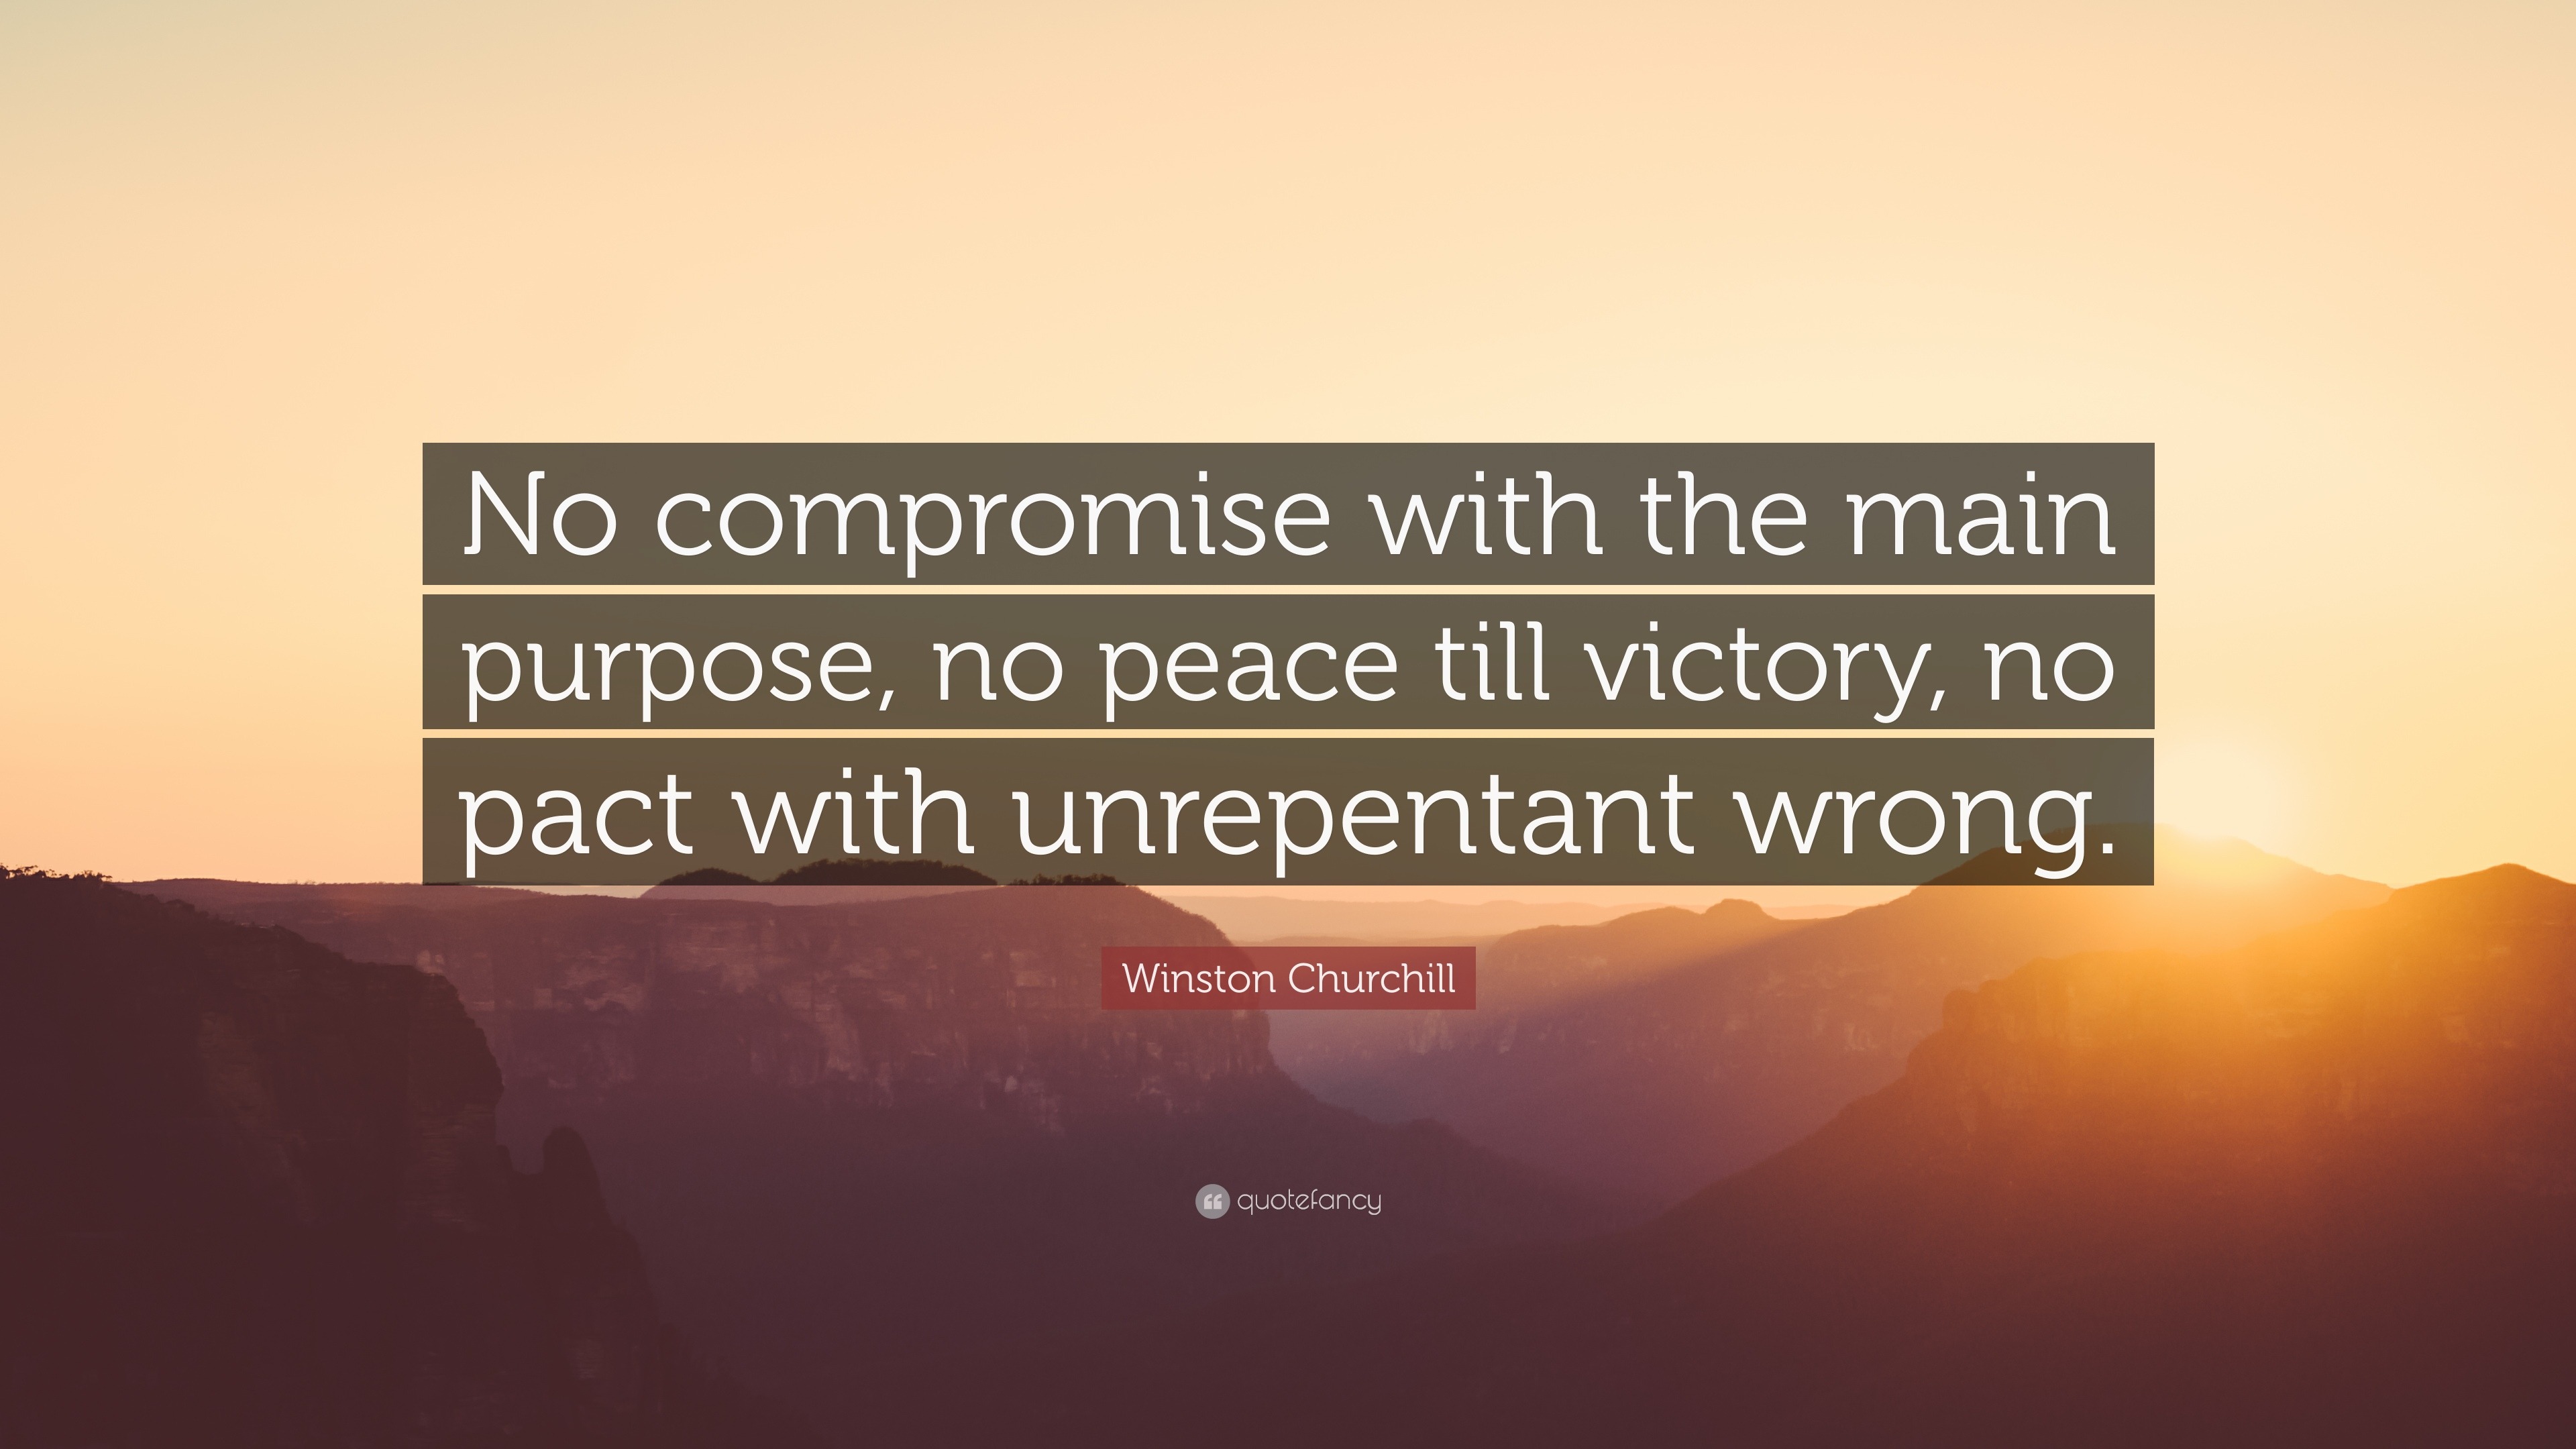 Winston Churchill Quote No Compromise With The Main Purpose No Peace Till Victory No Pact With